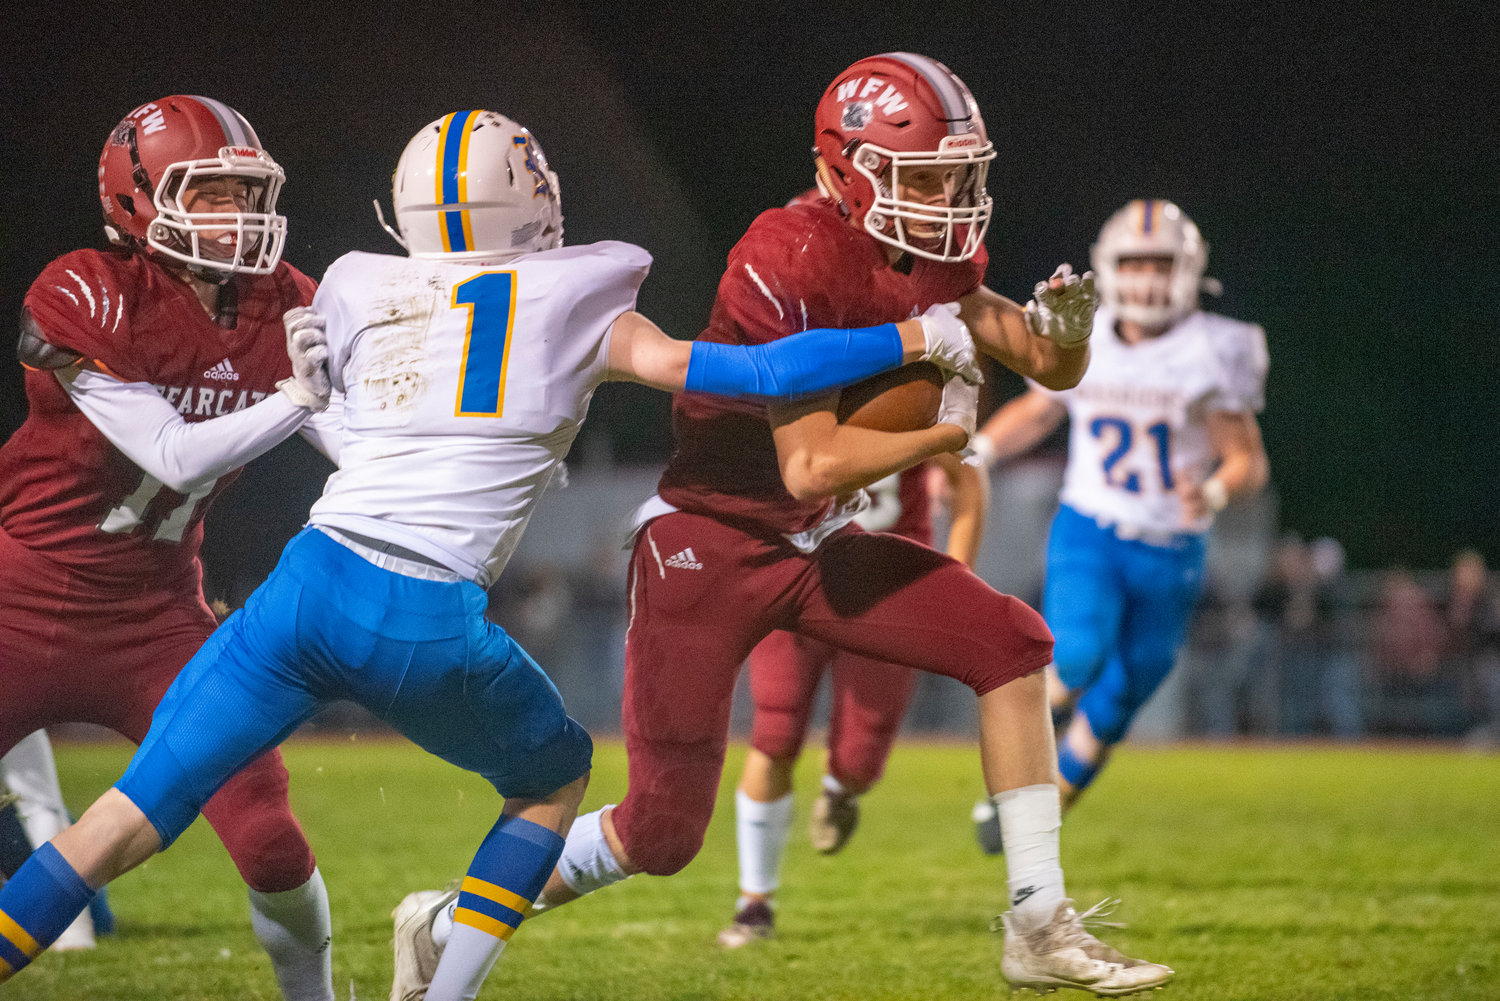 W.F. West running back Jacob Fuller (2) slips past Rochester corner Ashton Rodriguez (1) during a 2A Evergreen Conference matchup in Chehalis on Oct. 8, 2021.